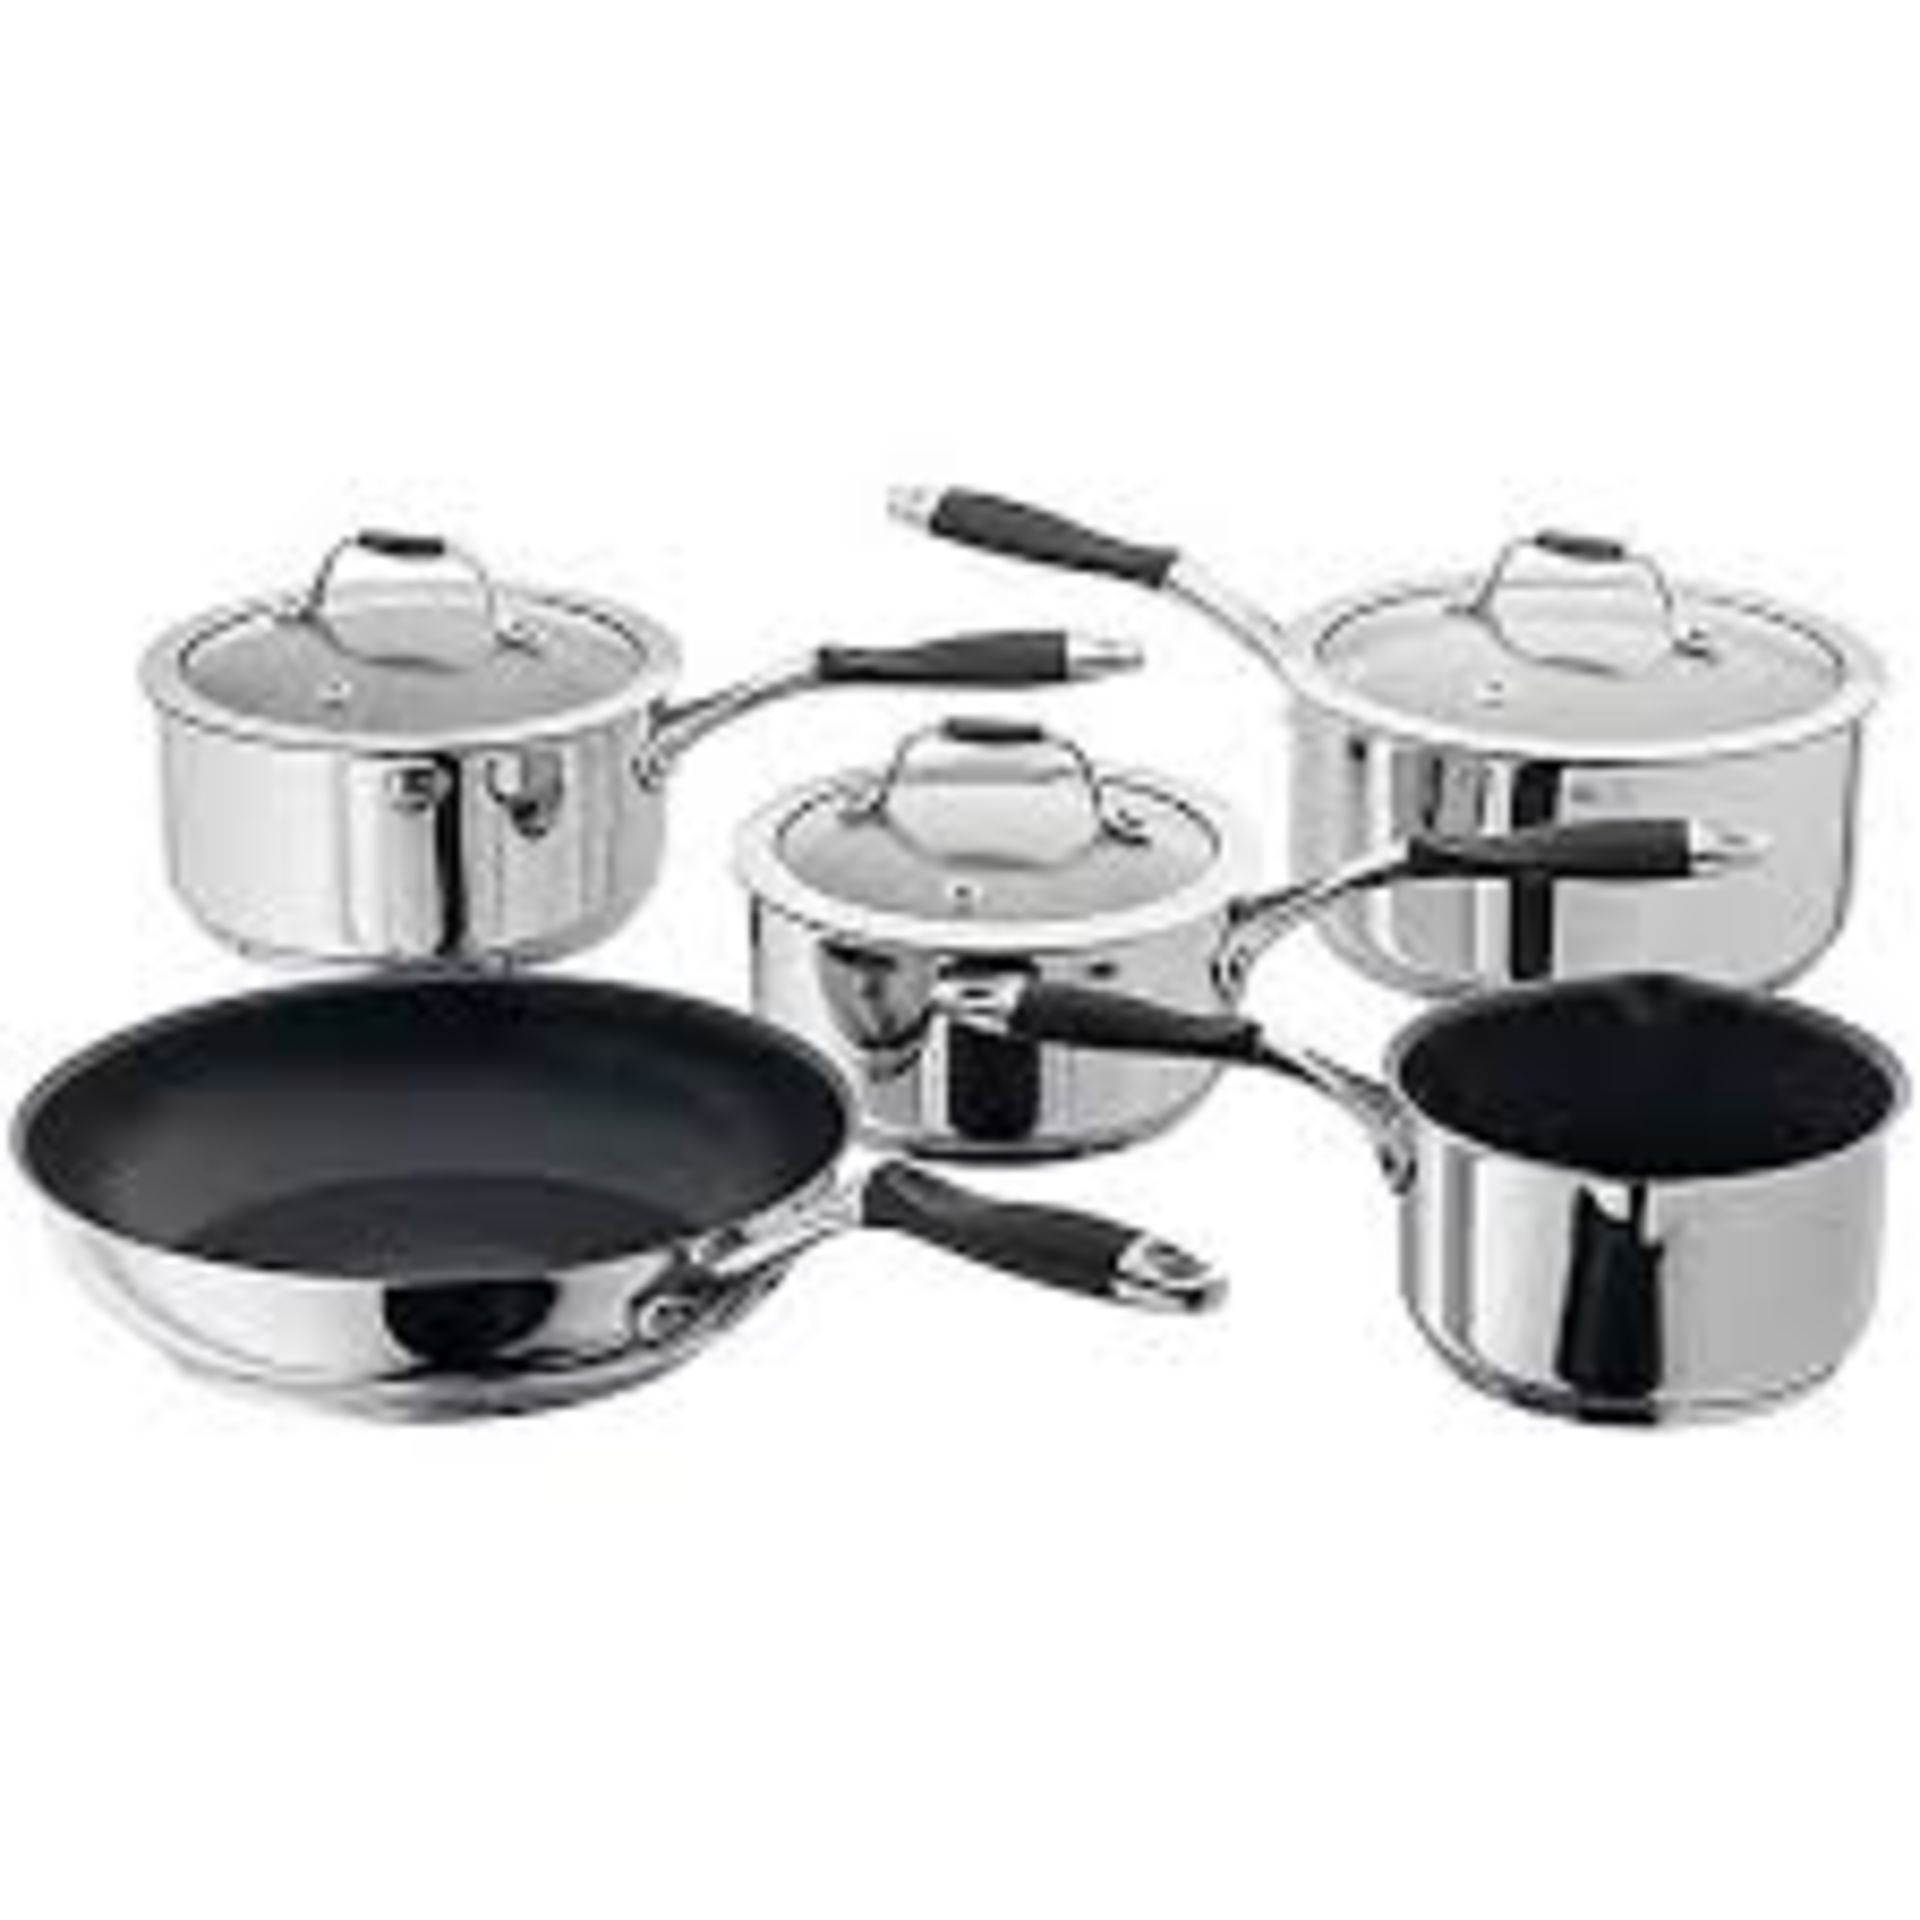 BOXED URBNCHEF 5 PIECE STAINLESS STEEL PAN SETS. EACH SET INCLUDES: 16CM SAUCE PAN WITH GLASS LID,